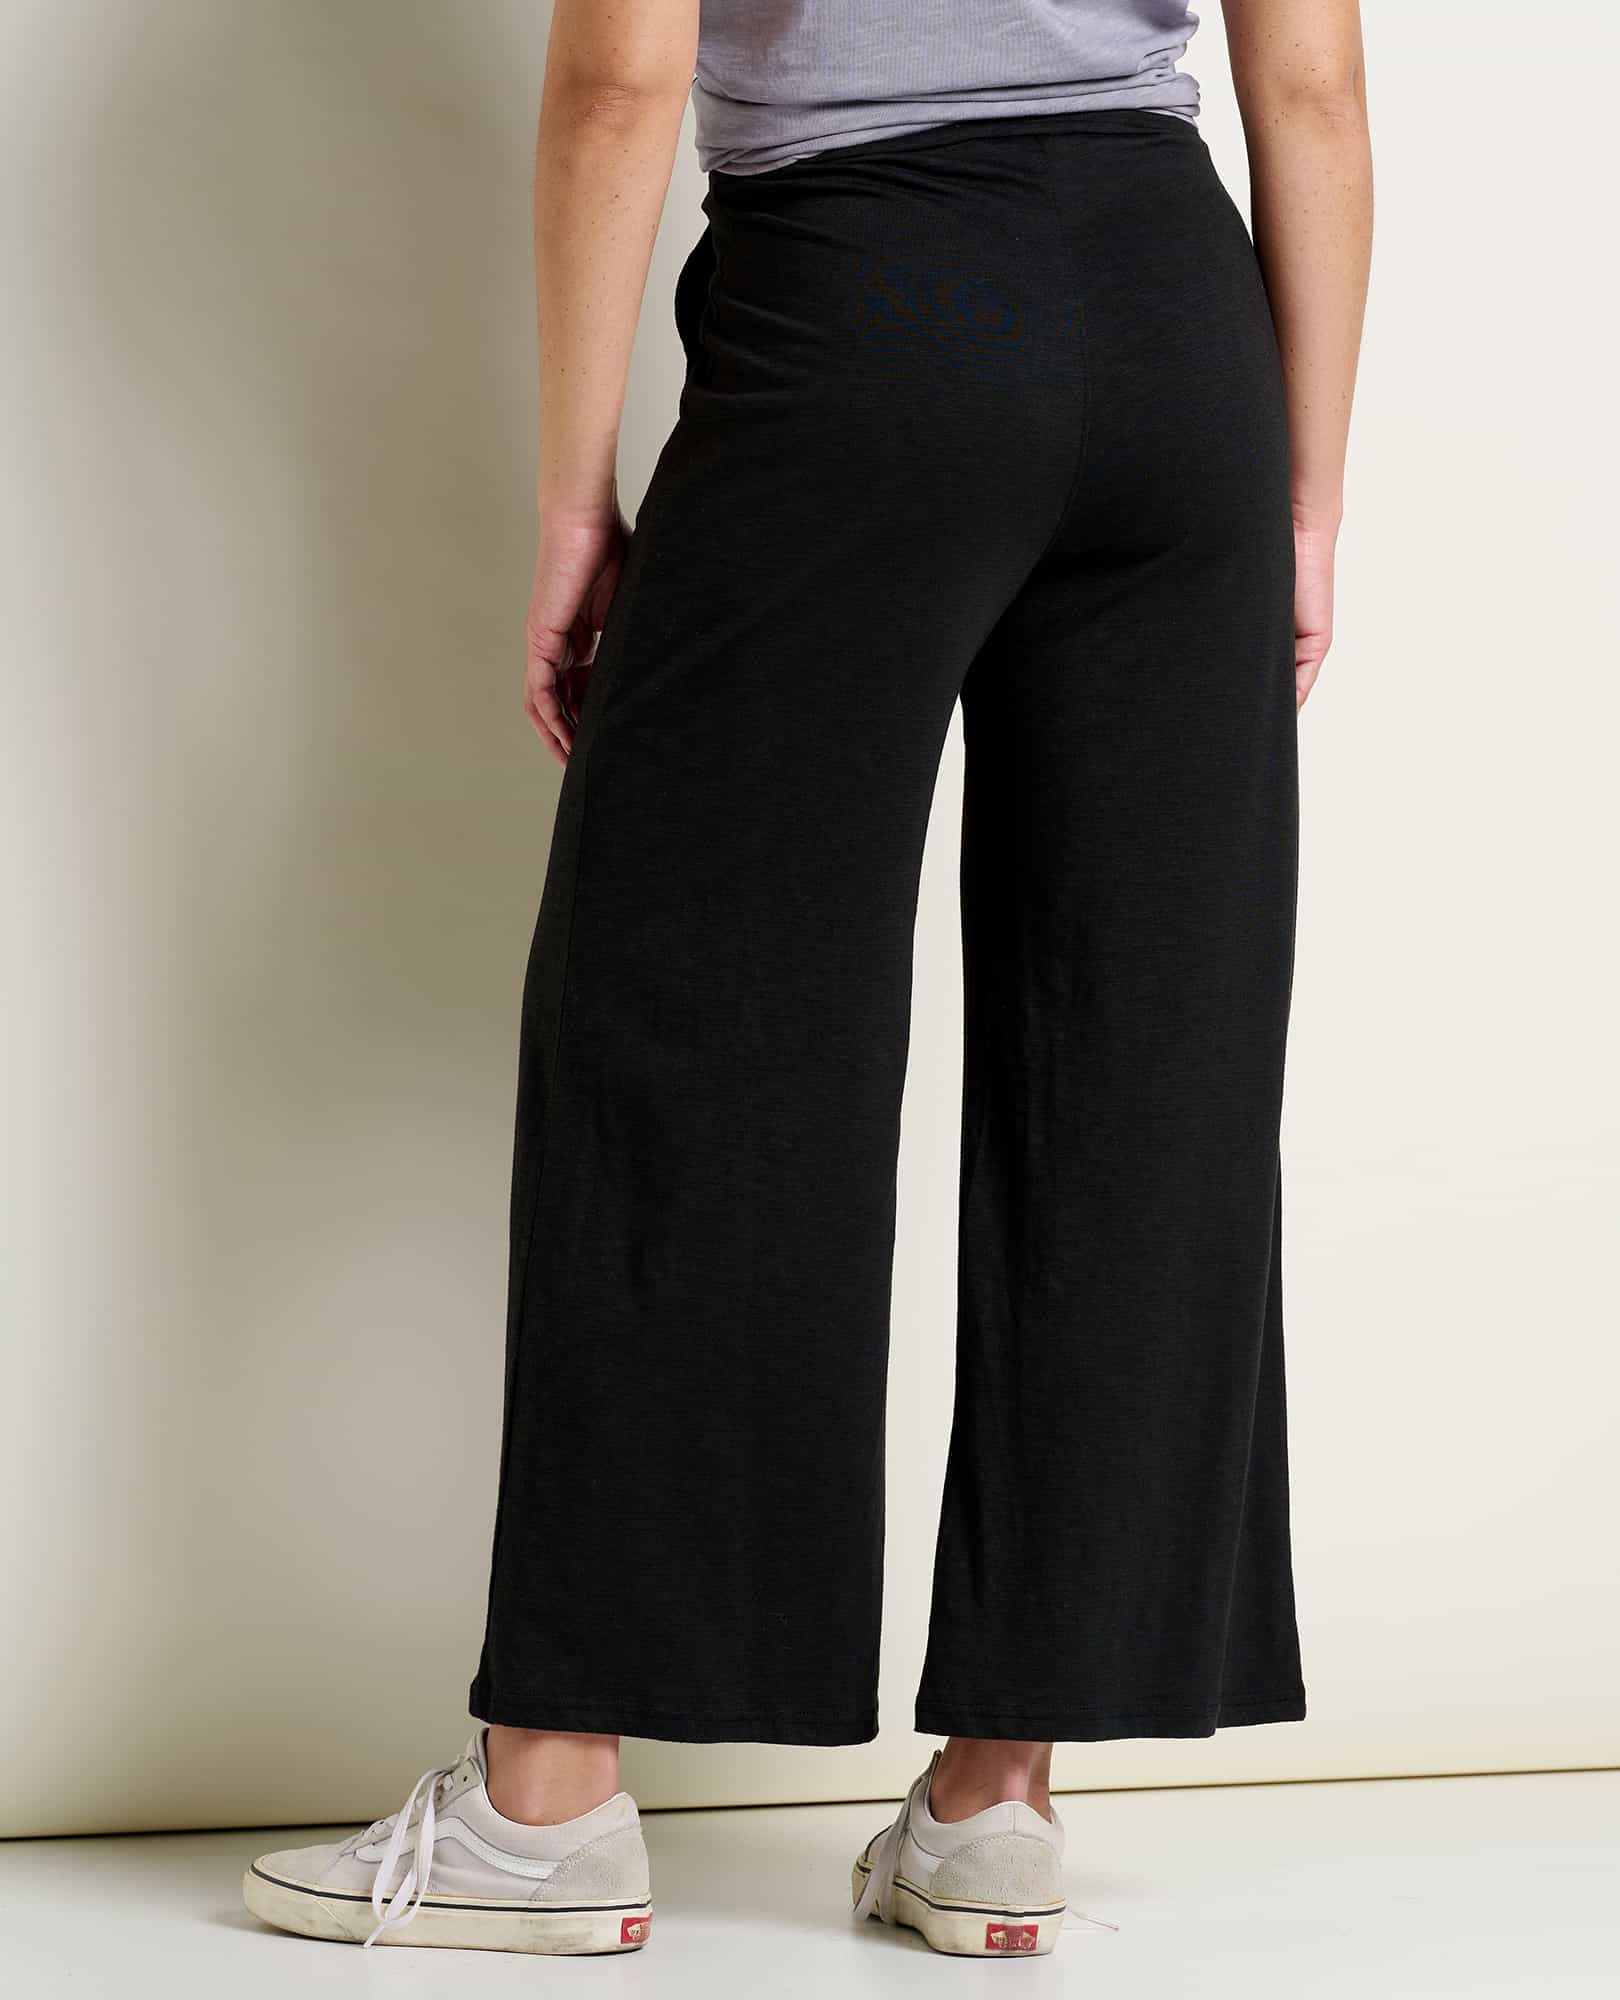 Wide Leg Capri Pants for Women Casual Summer Wide Leg Pants Elastic High  Waisted Cropped Lounge Trousers with Pockets